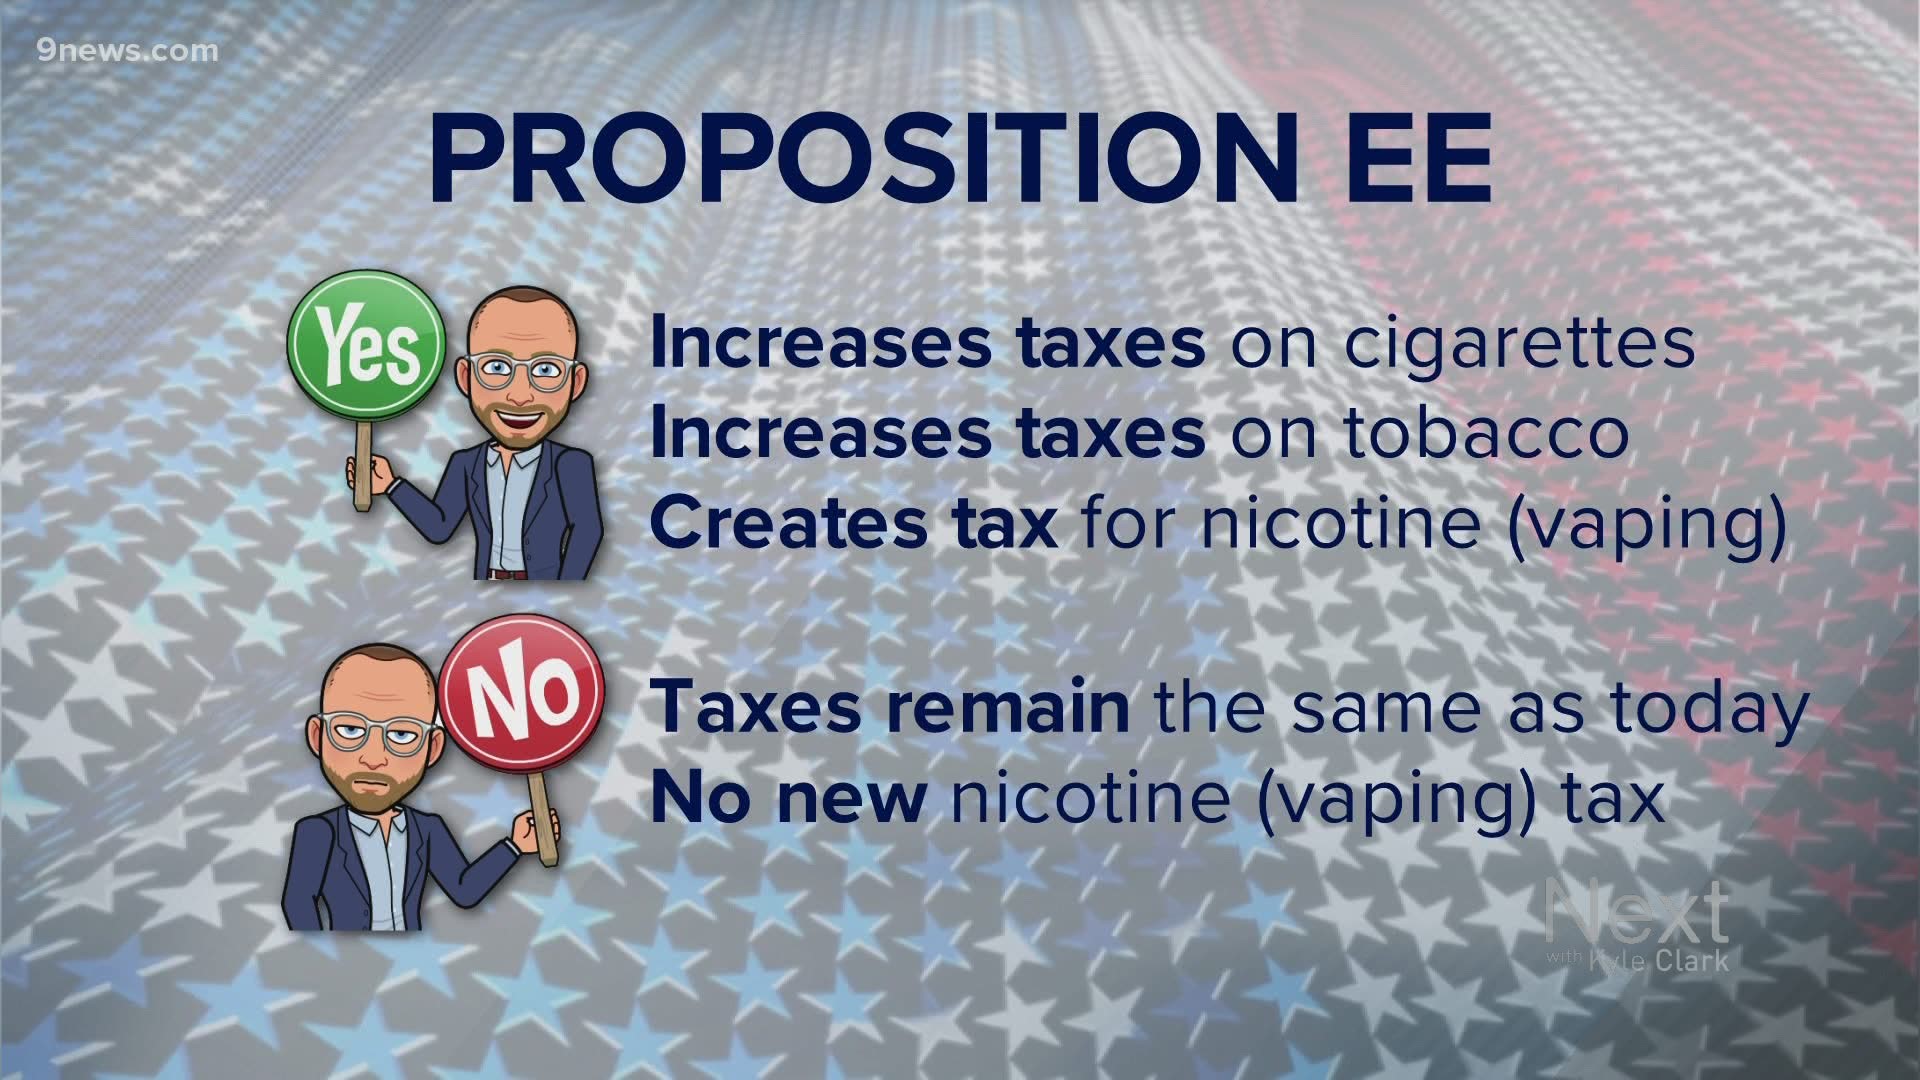 This is part of a series of statewide ballot reviews called "We Don't Have To Agree, But Let's Just Vote." Today we study Prop. EE and its effect on cigarette taxes.